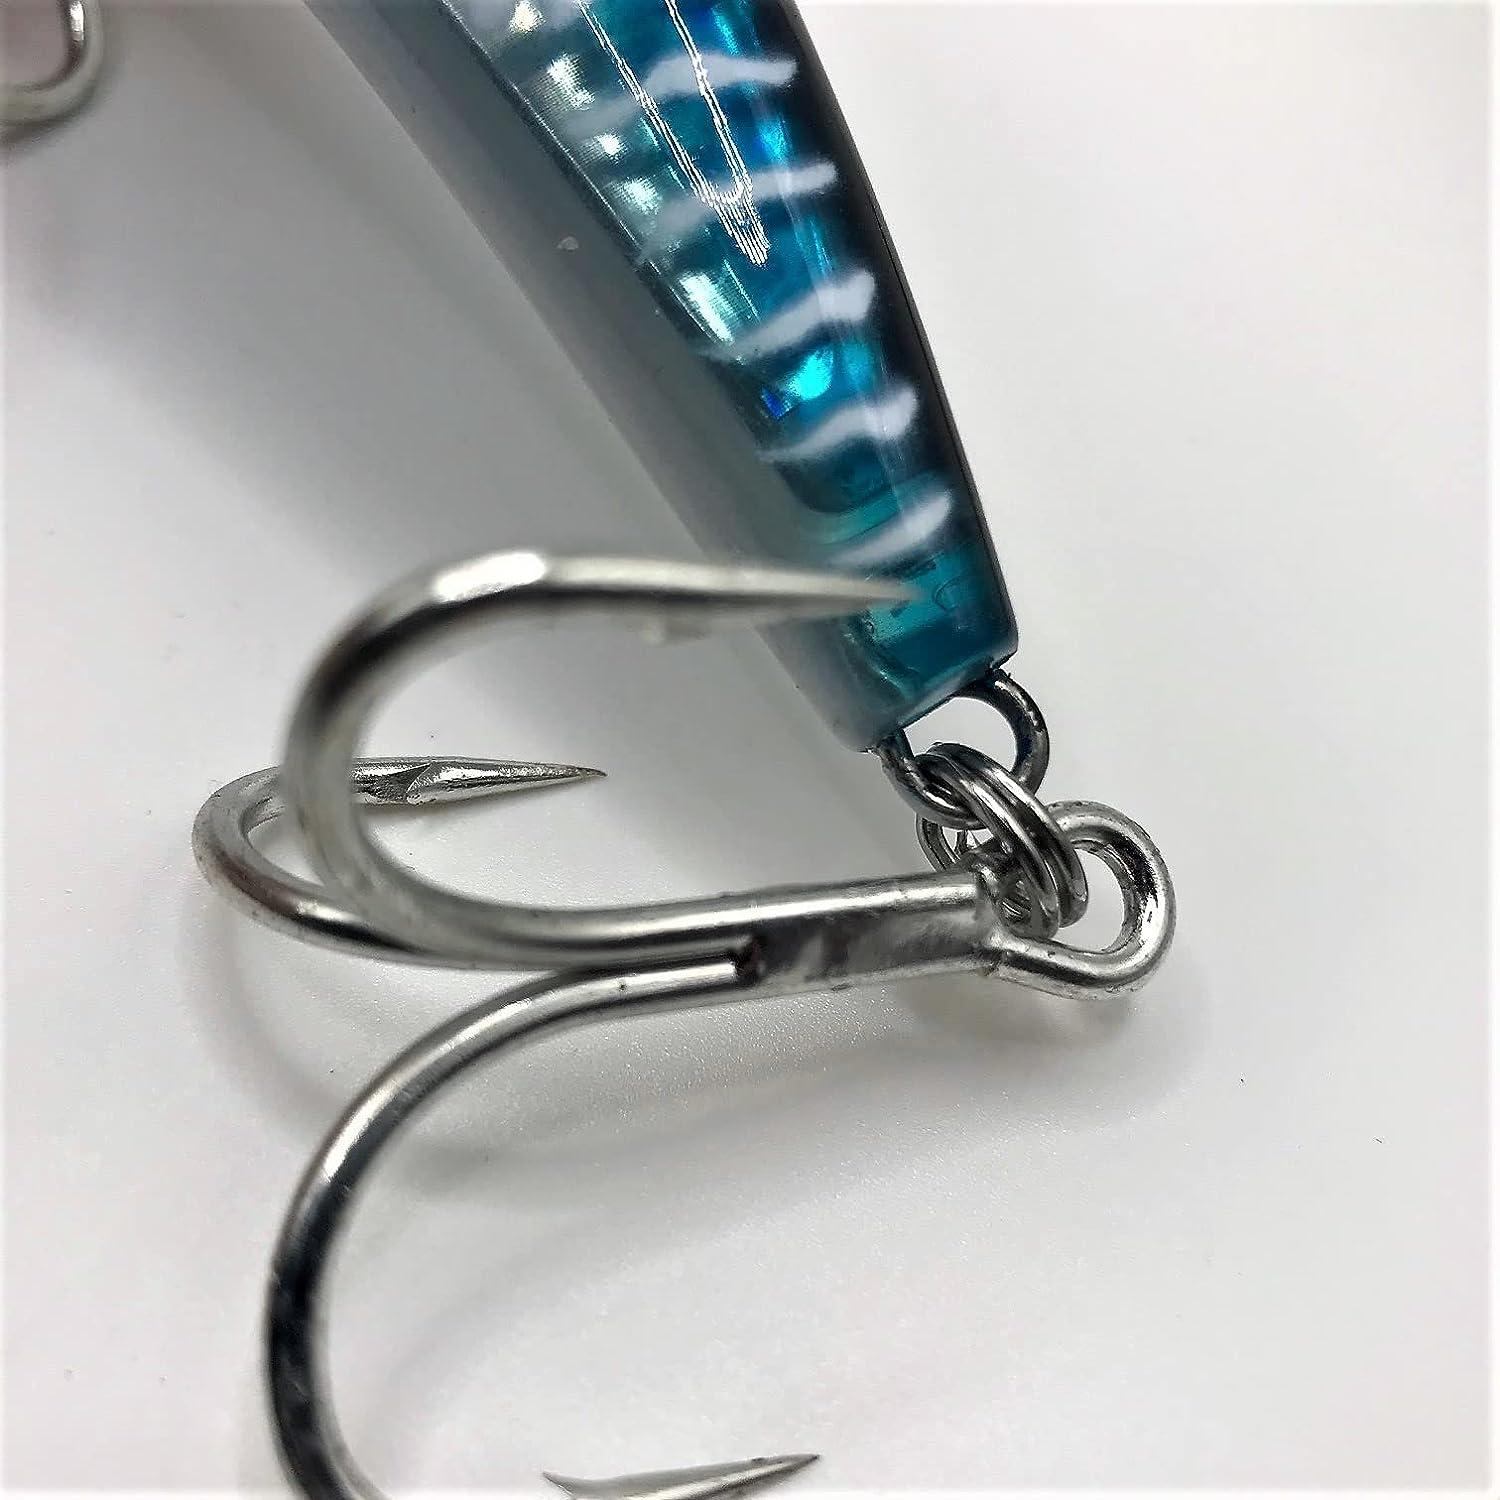 Deep Diving Saltwater trolling Lures for Striped Bass and Other